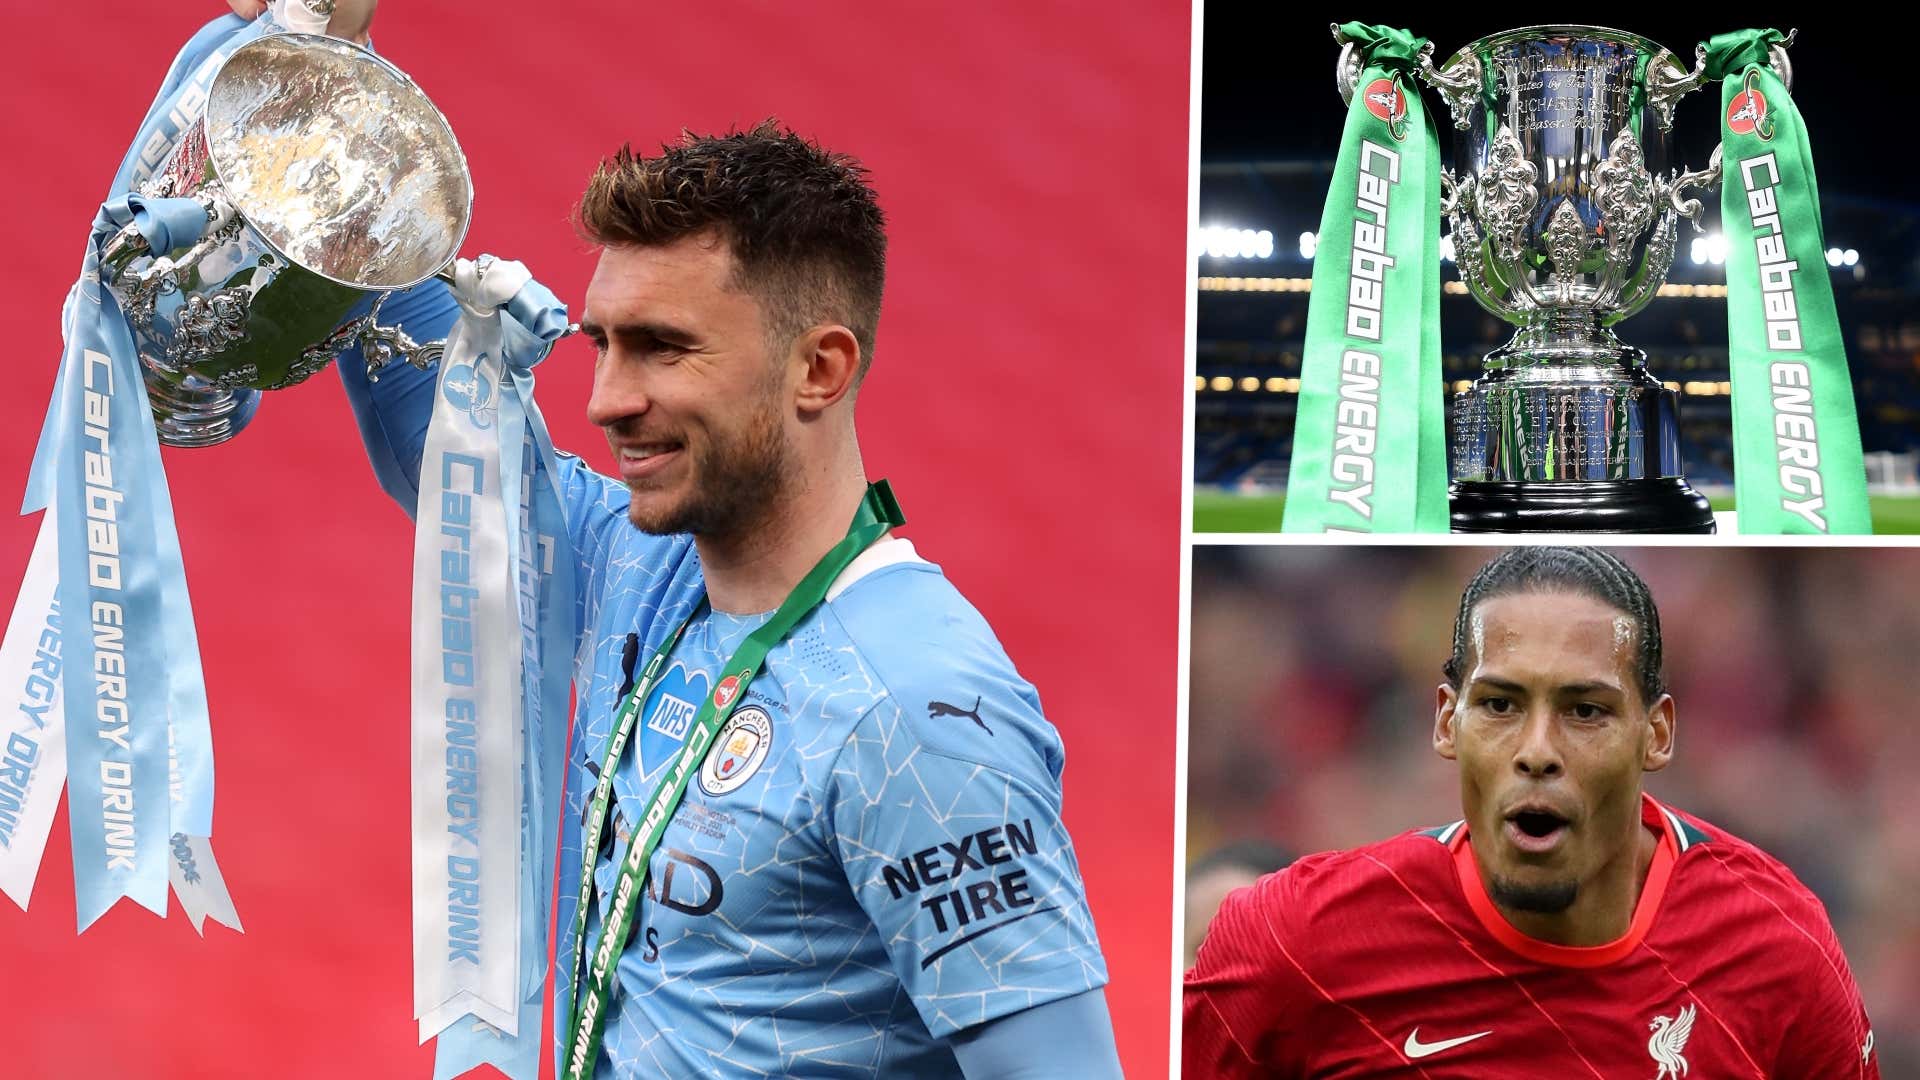 Photo of Carabao Cup 2021-22: Fixtures, draw dates, results, teams & everything you need to know